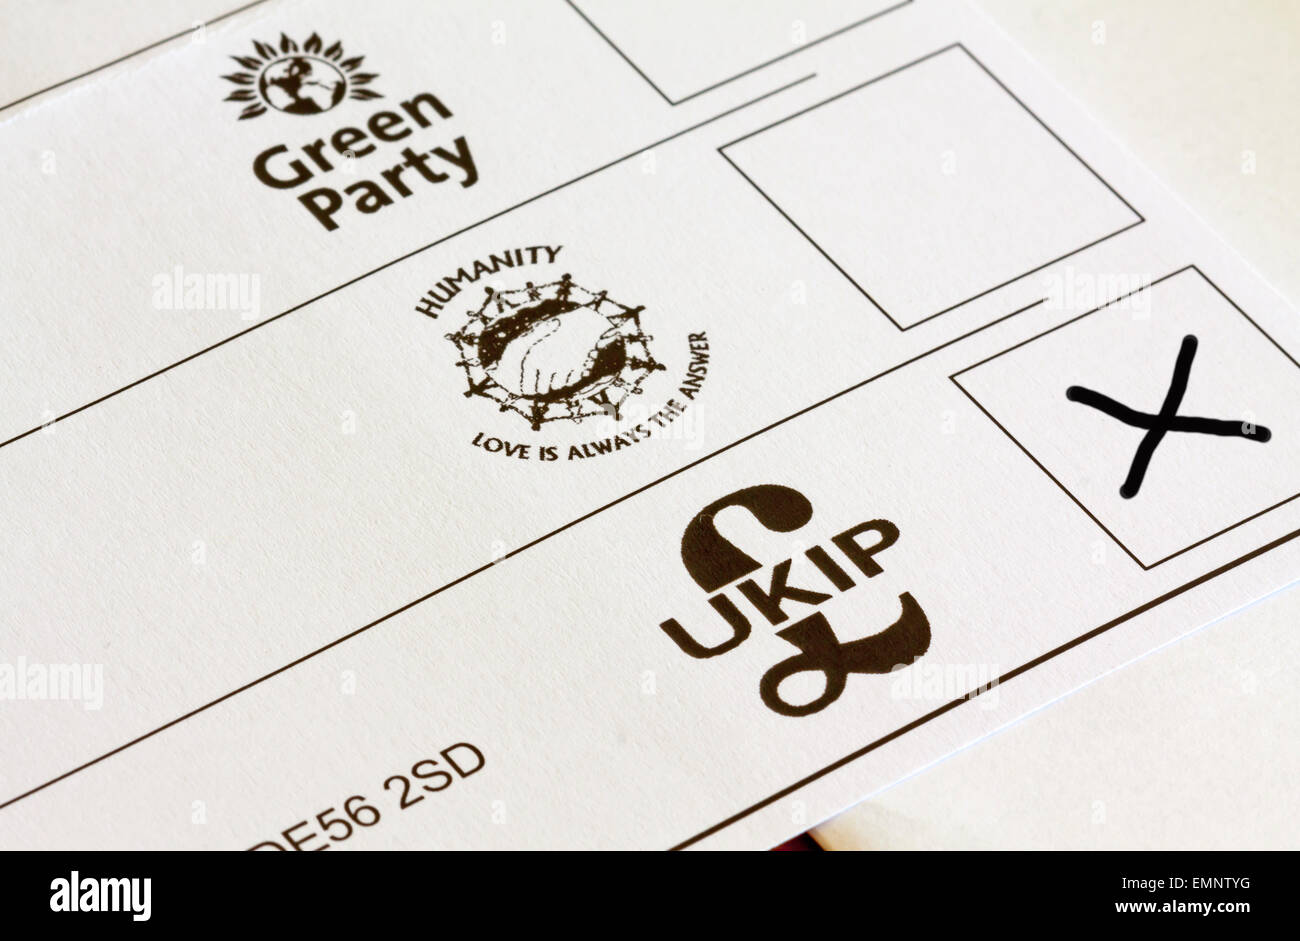 UK General Election ballot paper with boxes marked for voting for different political party candidates with cross in UKIP box Stock Photo